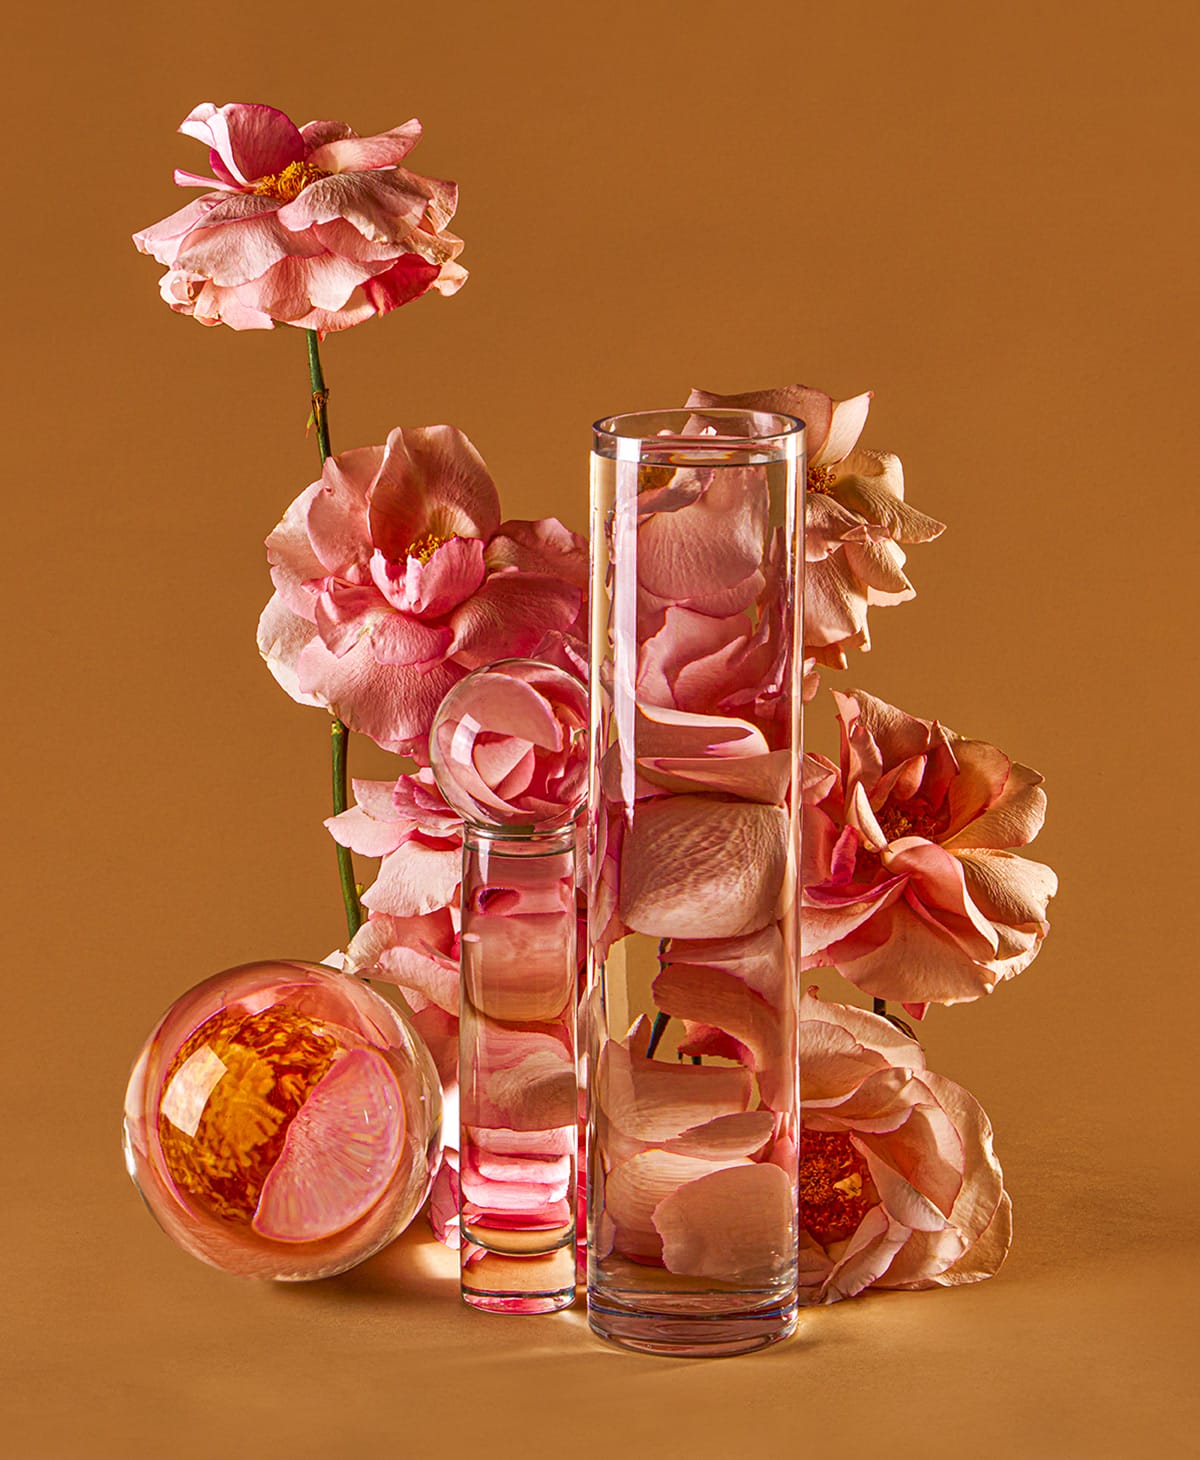 Perspective, Florals Distorted Through Water Vessels By Suzanne Saroff (3)